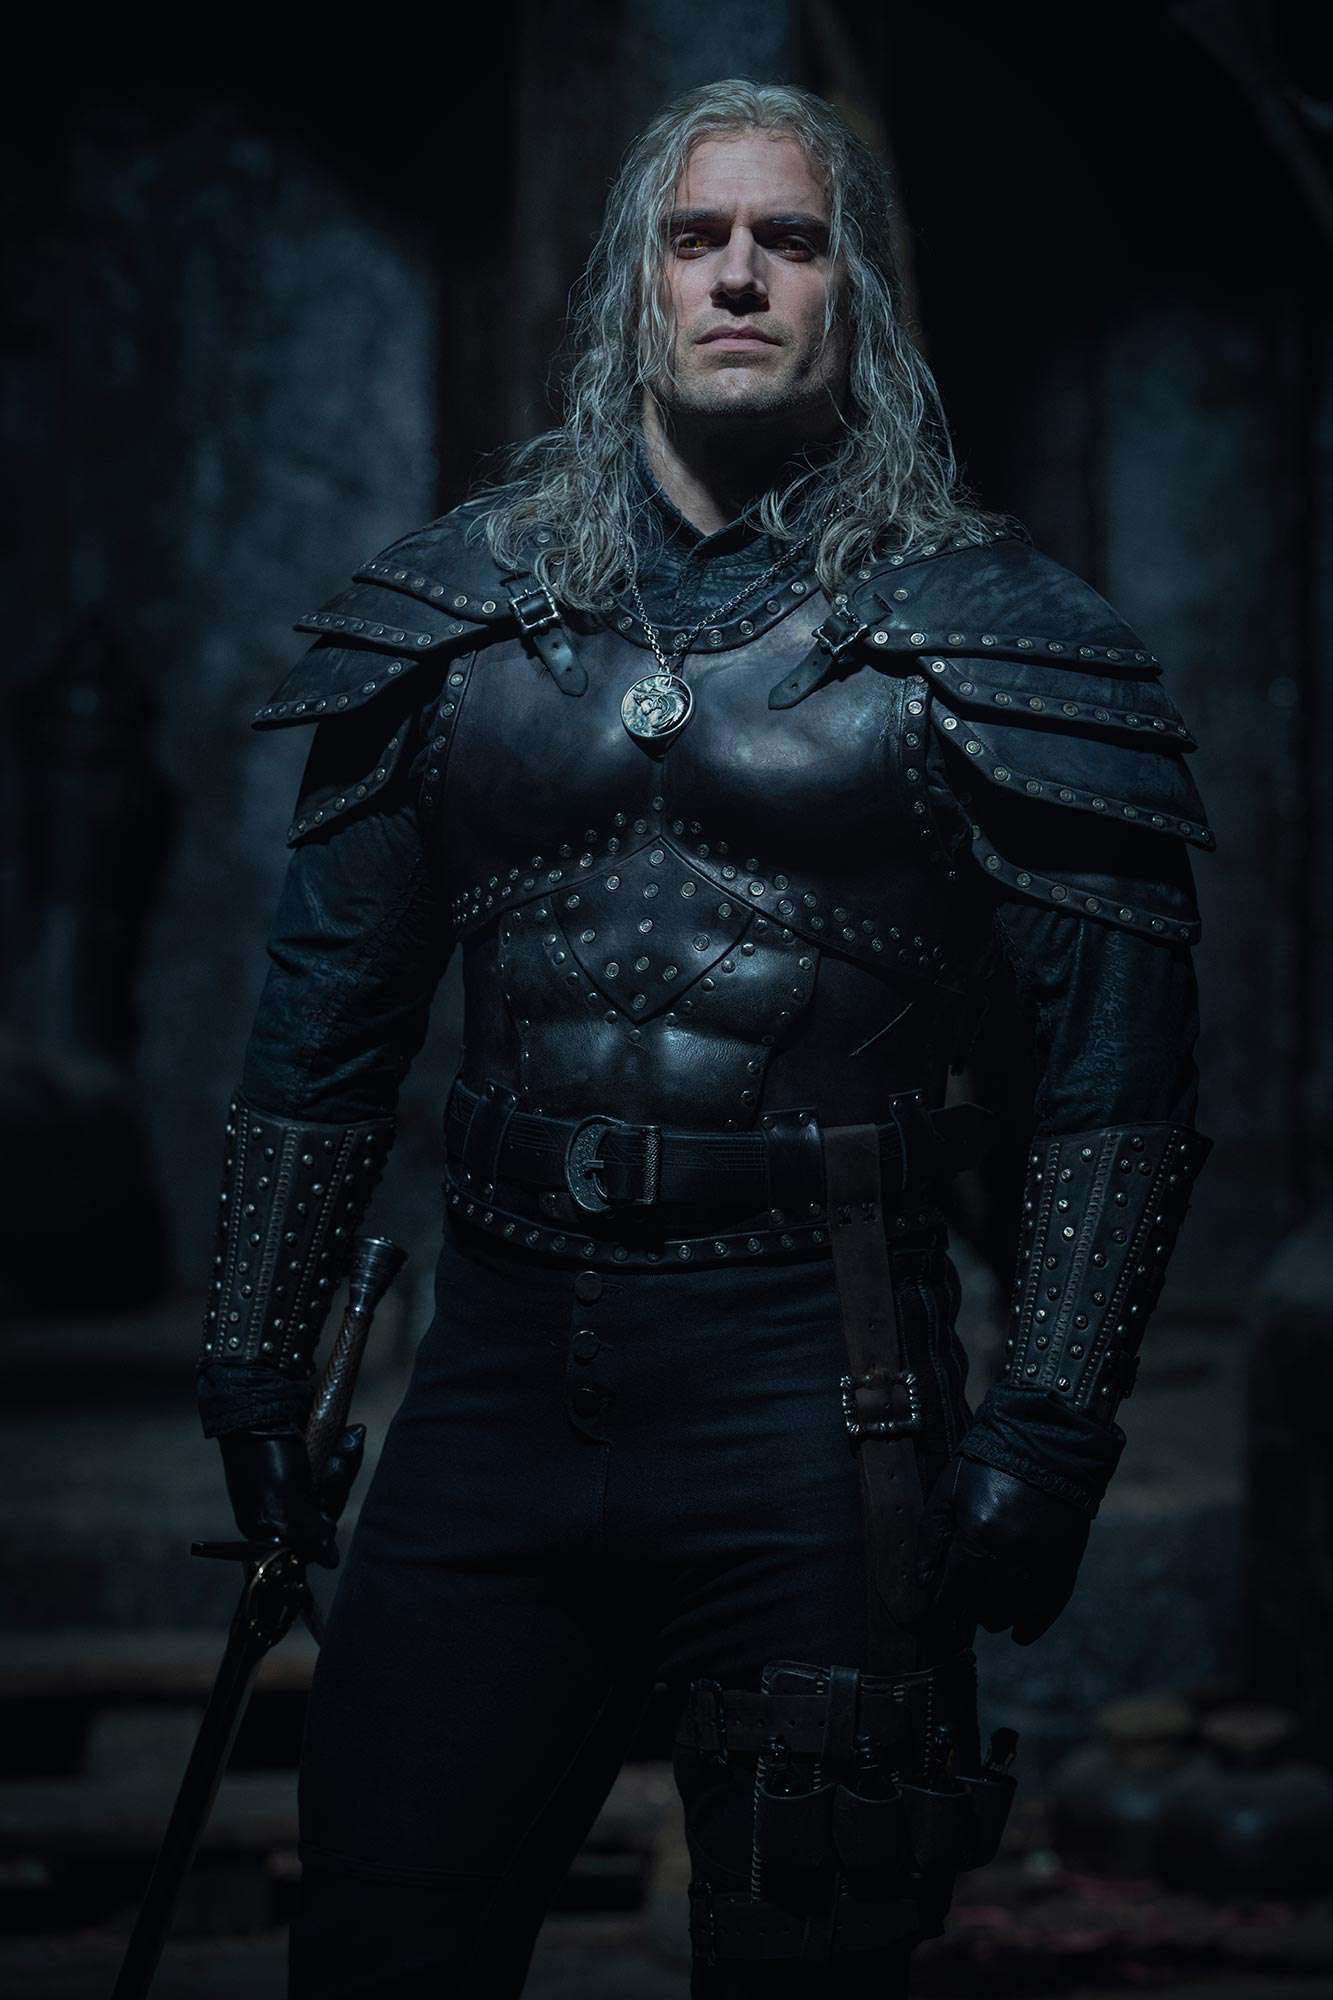 The Witcher season 2 first look